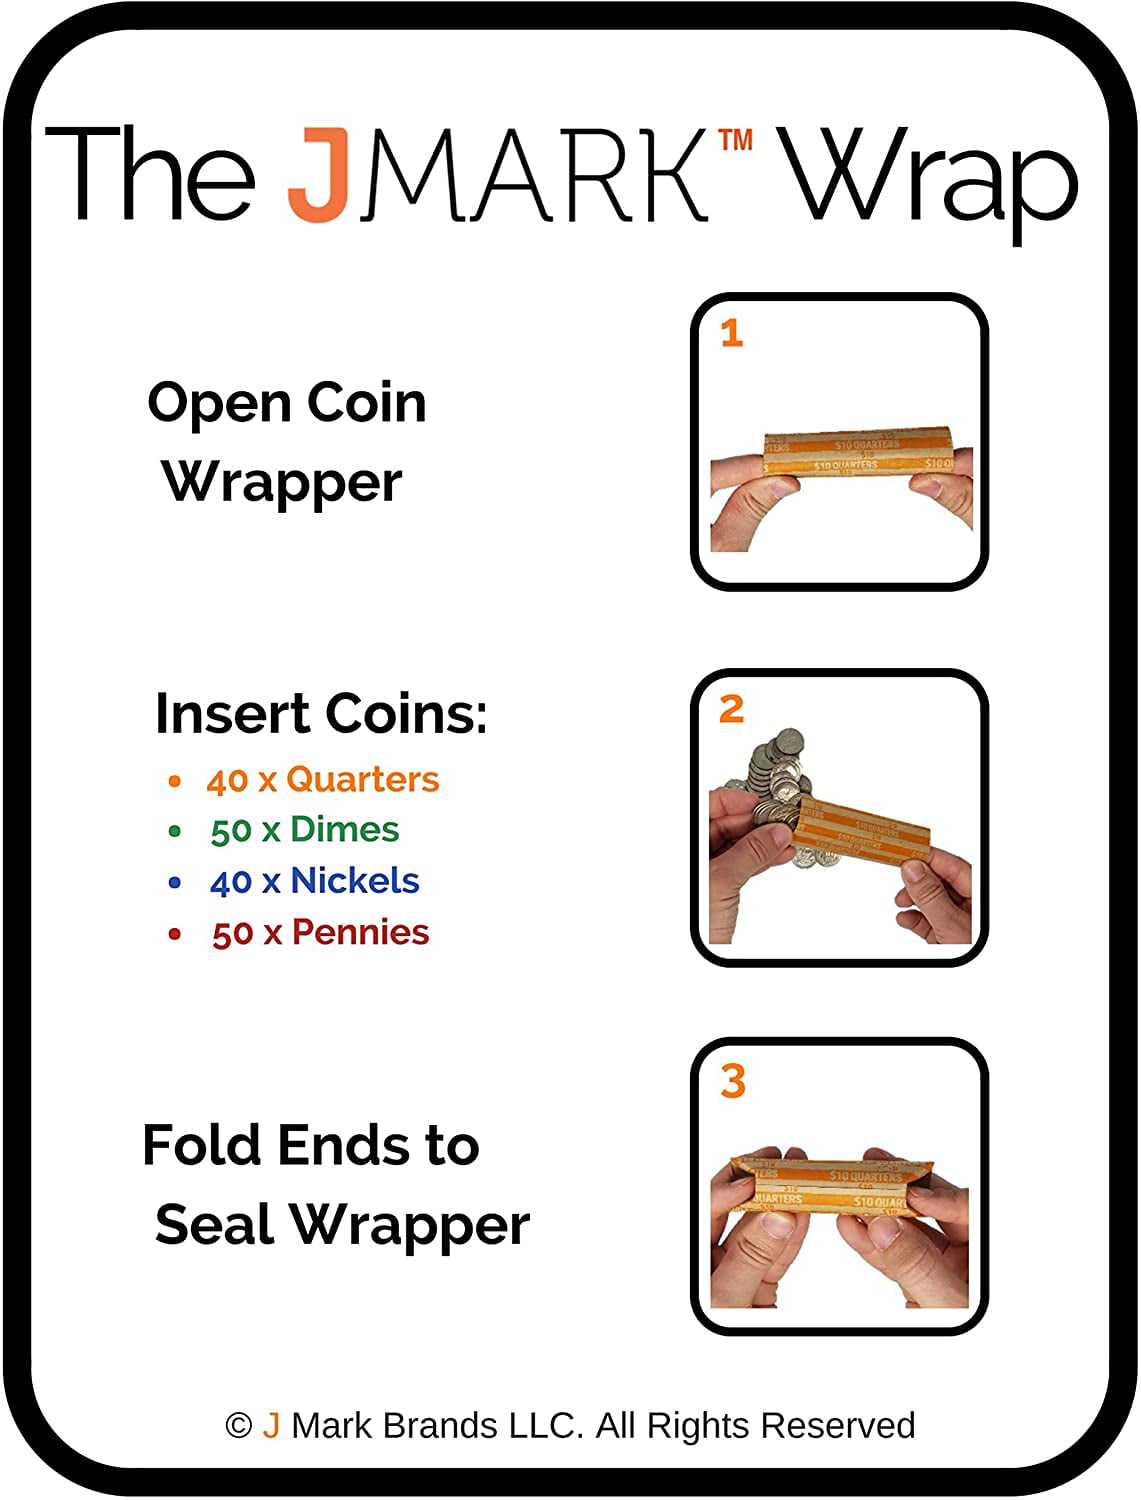 ABA Striped Kraft Paper Coin Roll Wrappers Includes Free J Mark Deposit Slip, Quarters, Dimes, Nickels, Pennies J Mark Neatly-Packed Flat Coin Roll Wrappers Extra Pennies 1,000-Pack USD